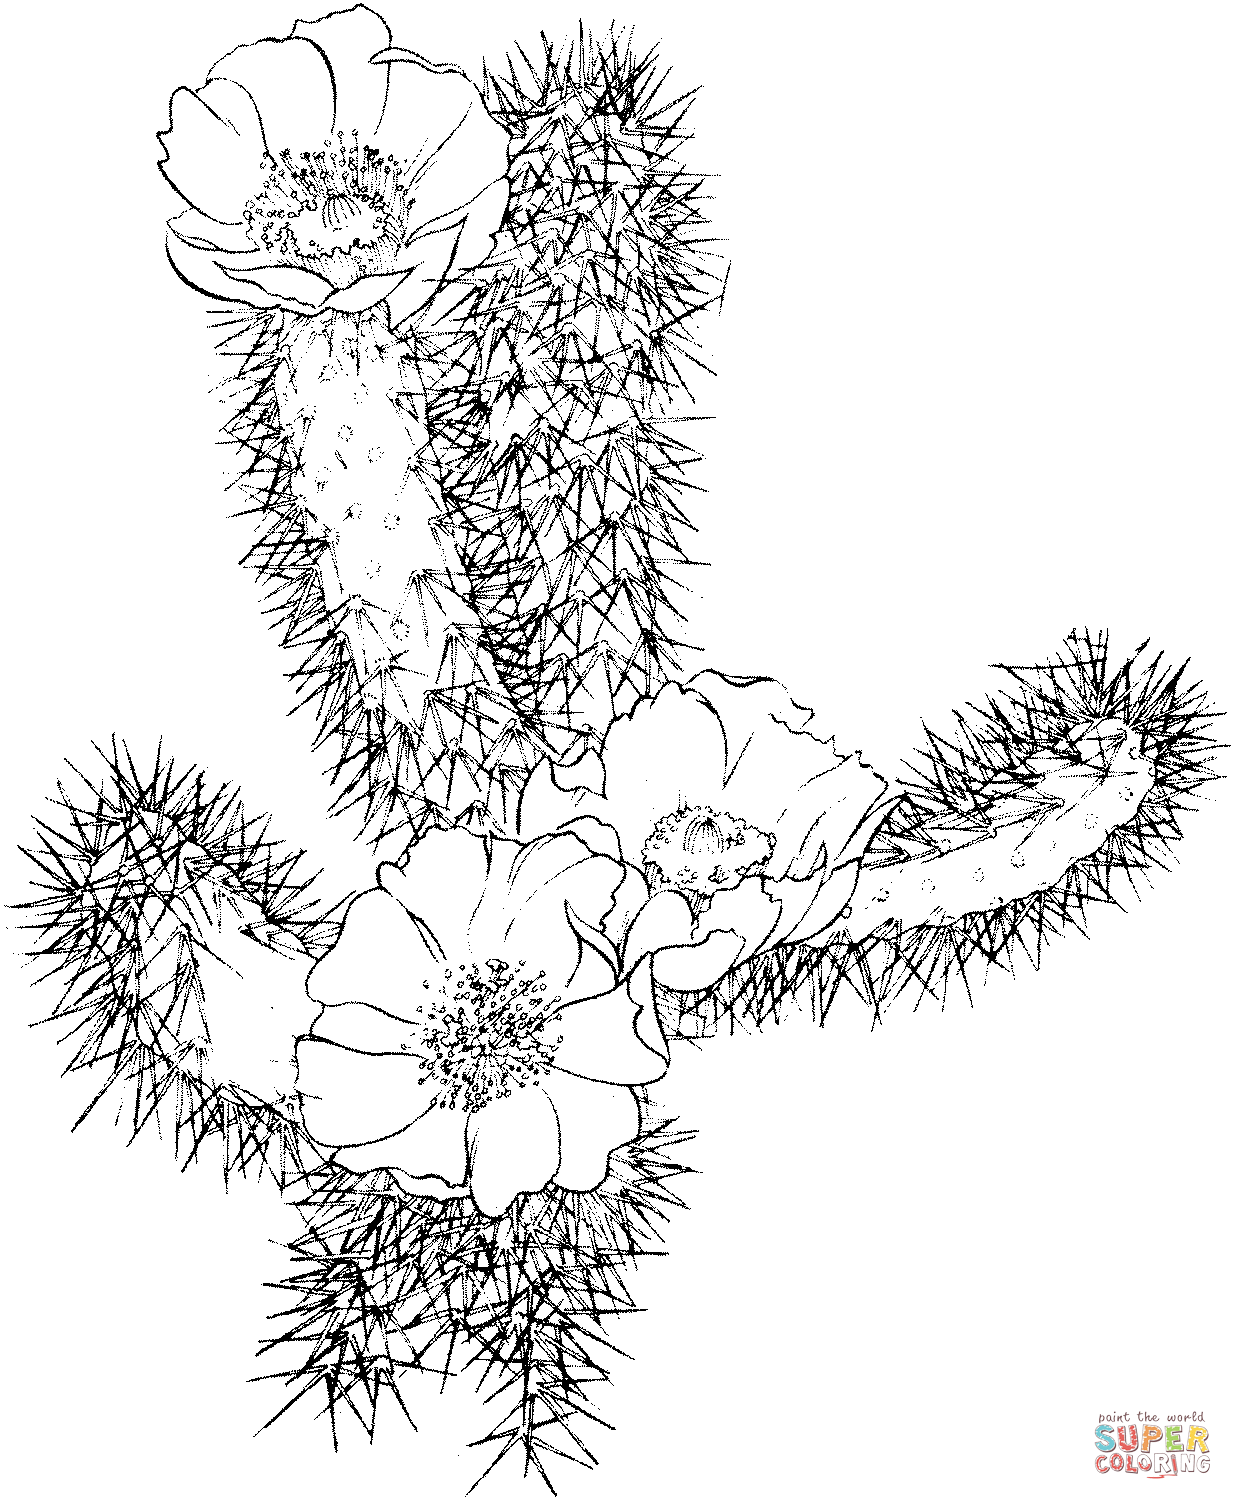 Cactus Blossom coloring #16, Download drawings